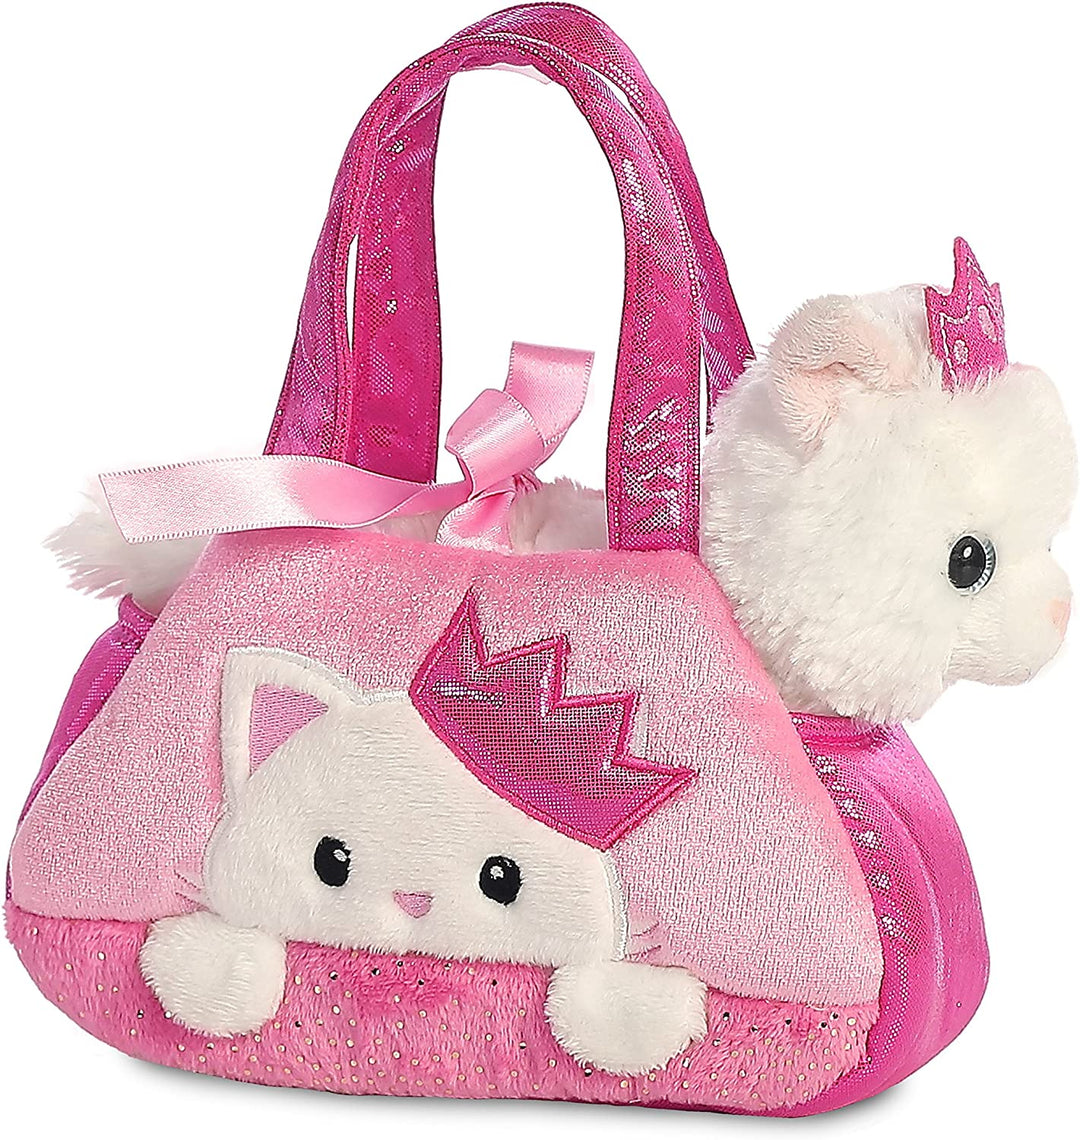 AURORA, 32791, Fancy Pal, Peek-A-Boo Princess Kitty, 8In, Soft Toy, Pink and White